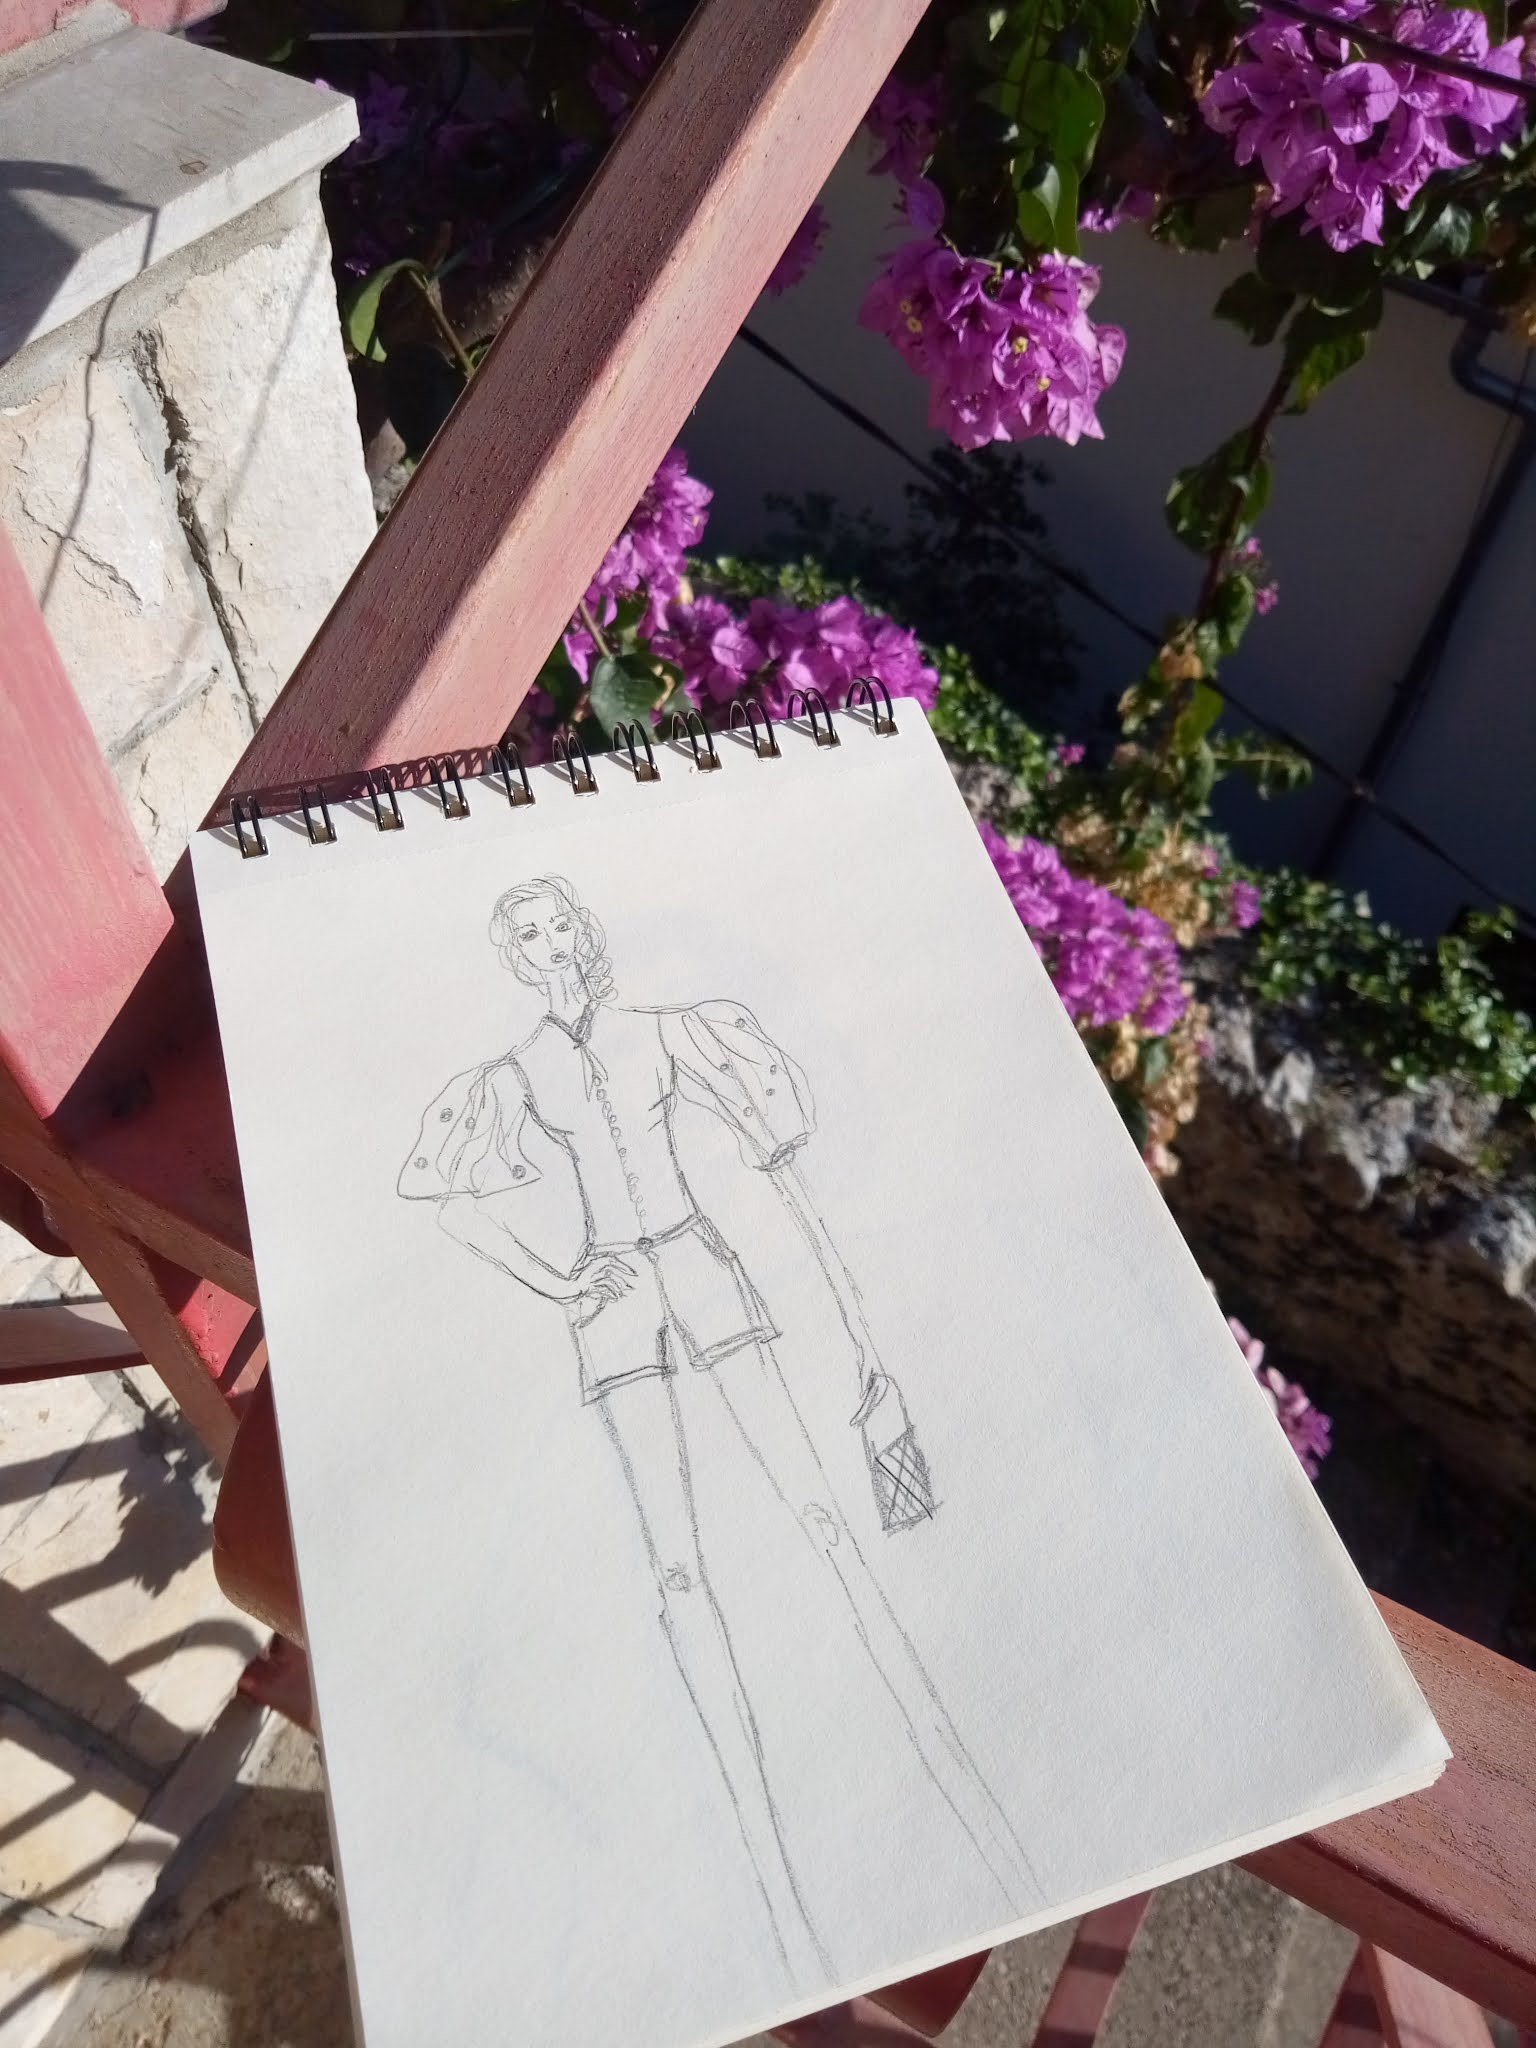 ART UPDATE MODAODARADOSTI: FASHION ILLUSTRATIONS, SKETCHES AND A LANDSCAPE PAINTING